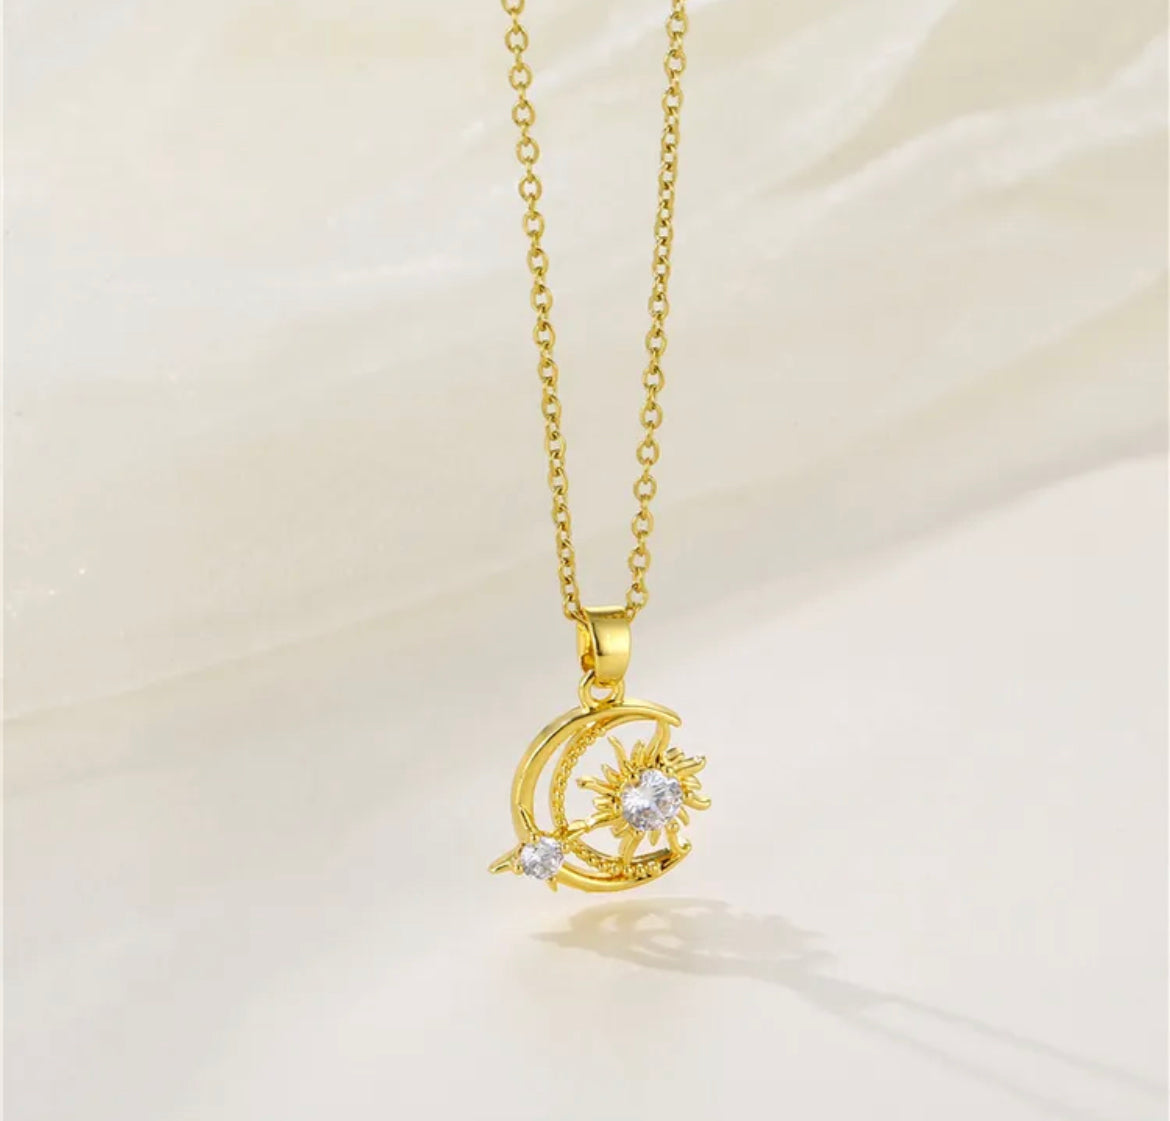 Moon star necklace